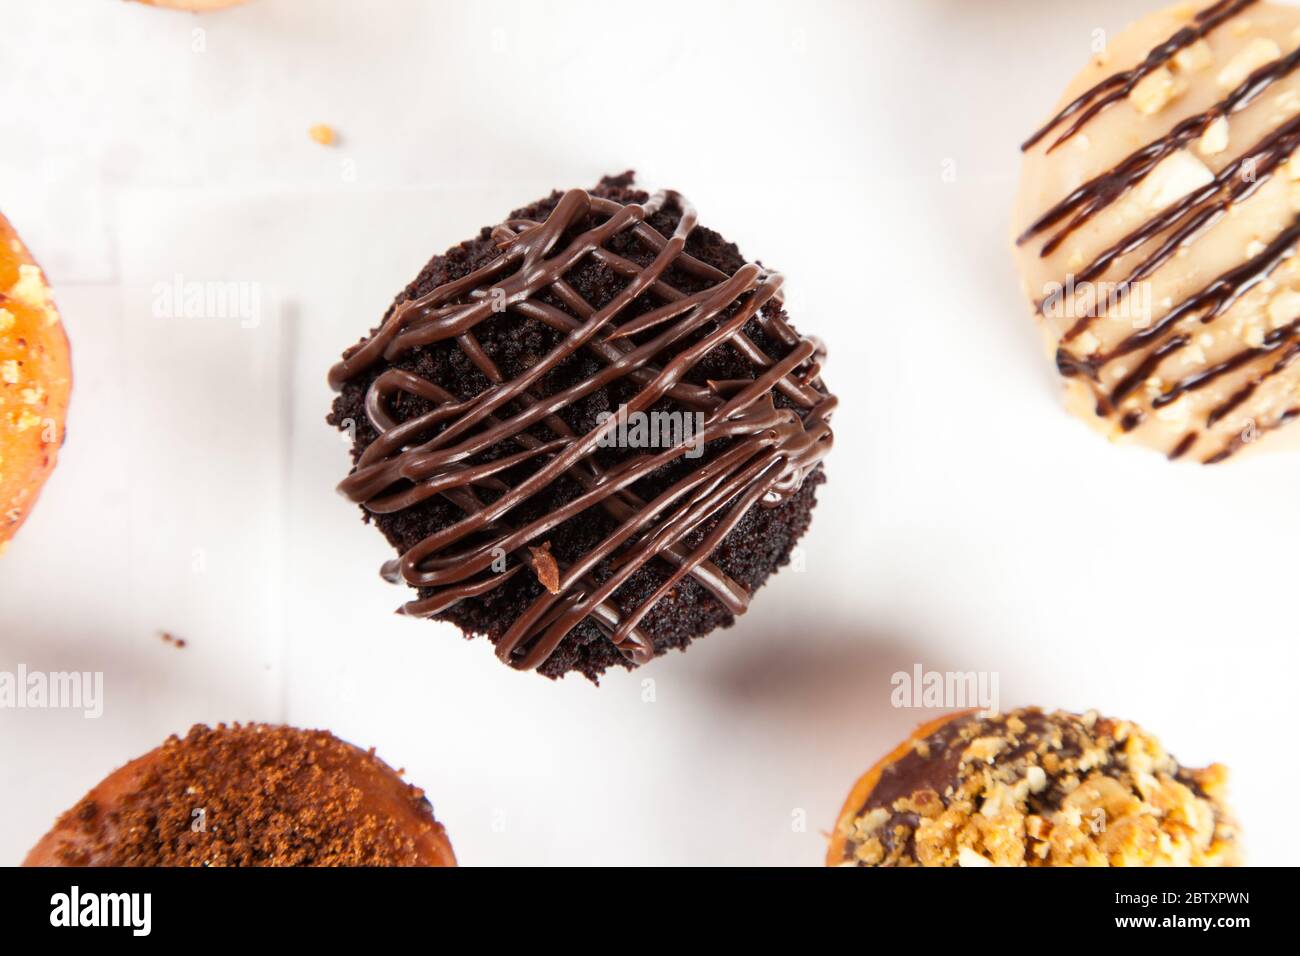 Chocolate Cake Donut with sugary frosting Stock Photo